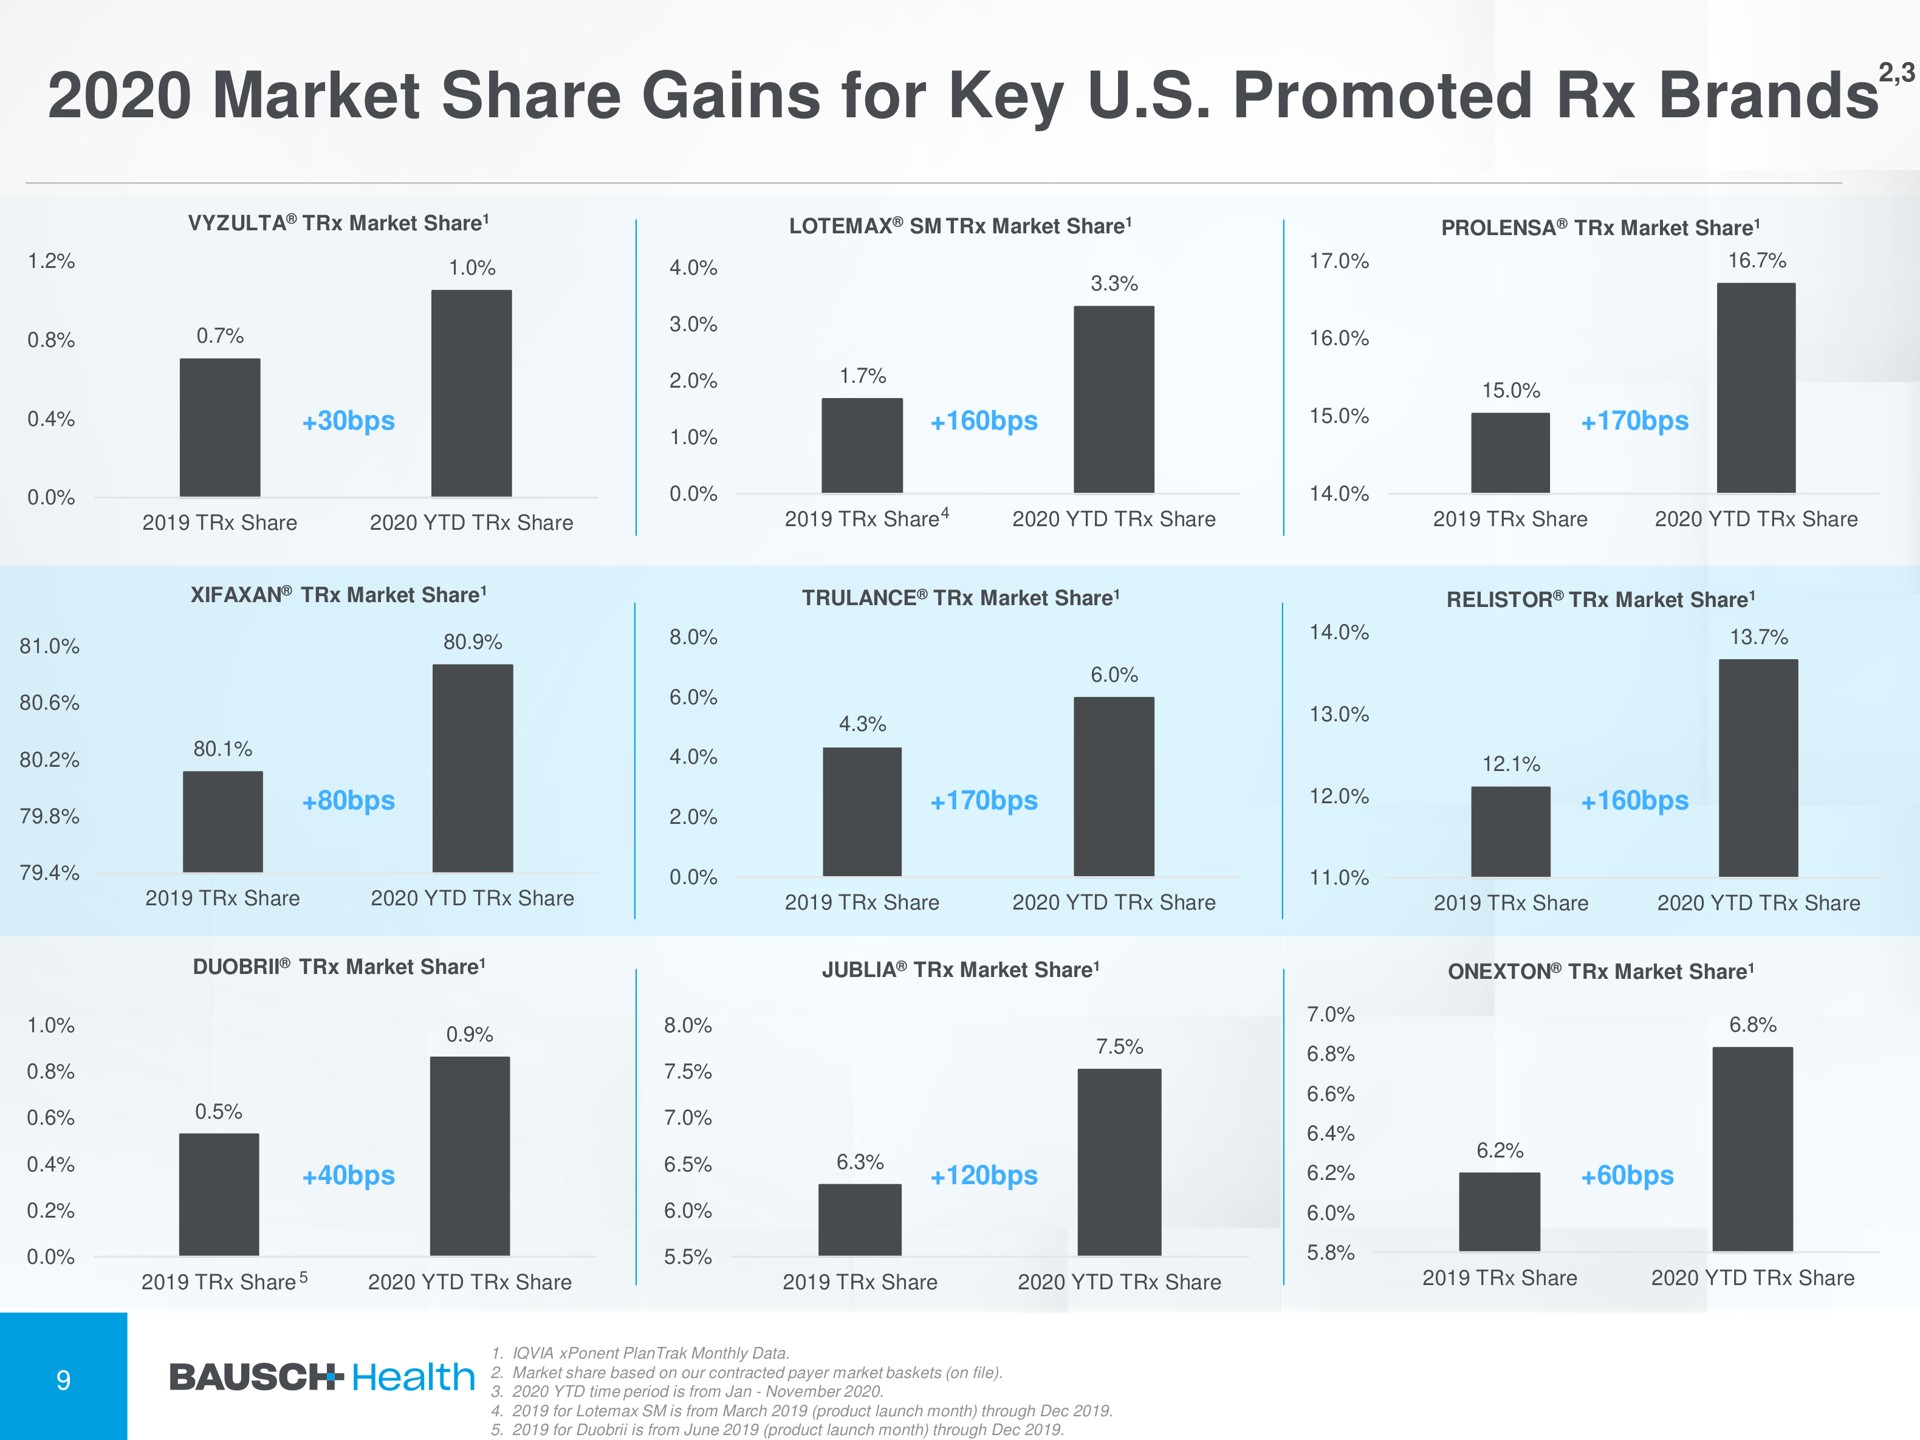 market share gains for key promoted brands | Bausch Health Companies